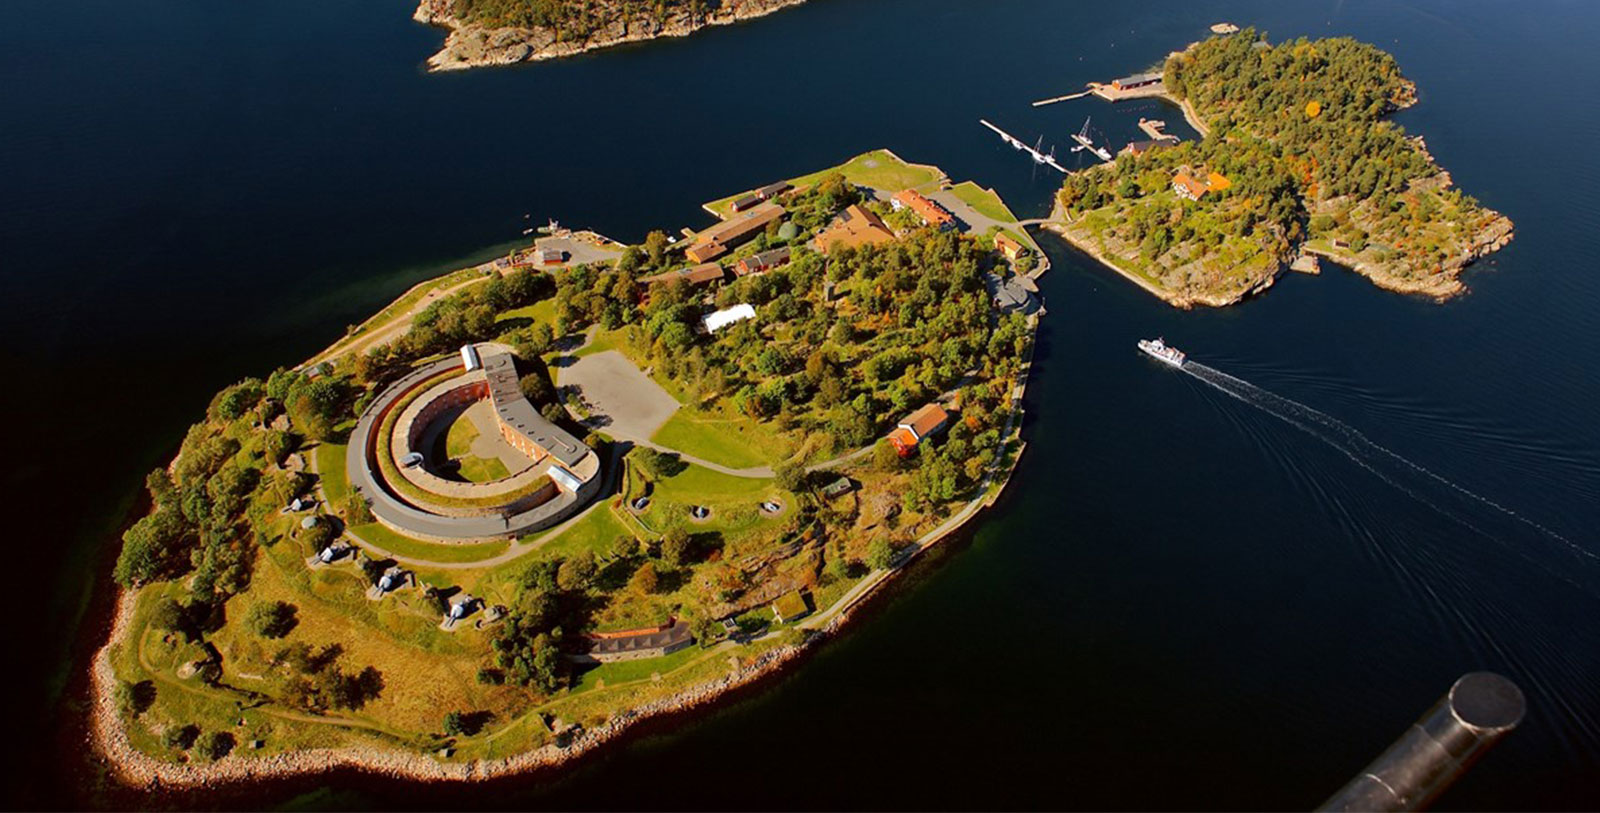 Take a day trip to Oslo to see Akershus Fortress, the Viking Ship Museum, and the Vigeland Sculpture Park.